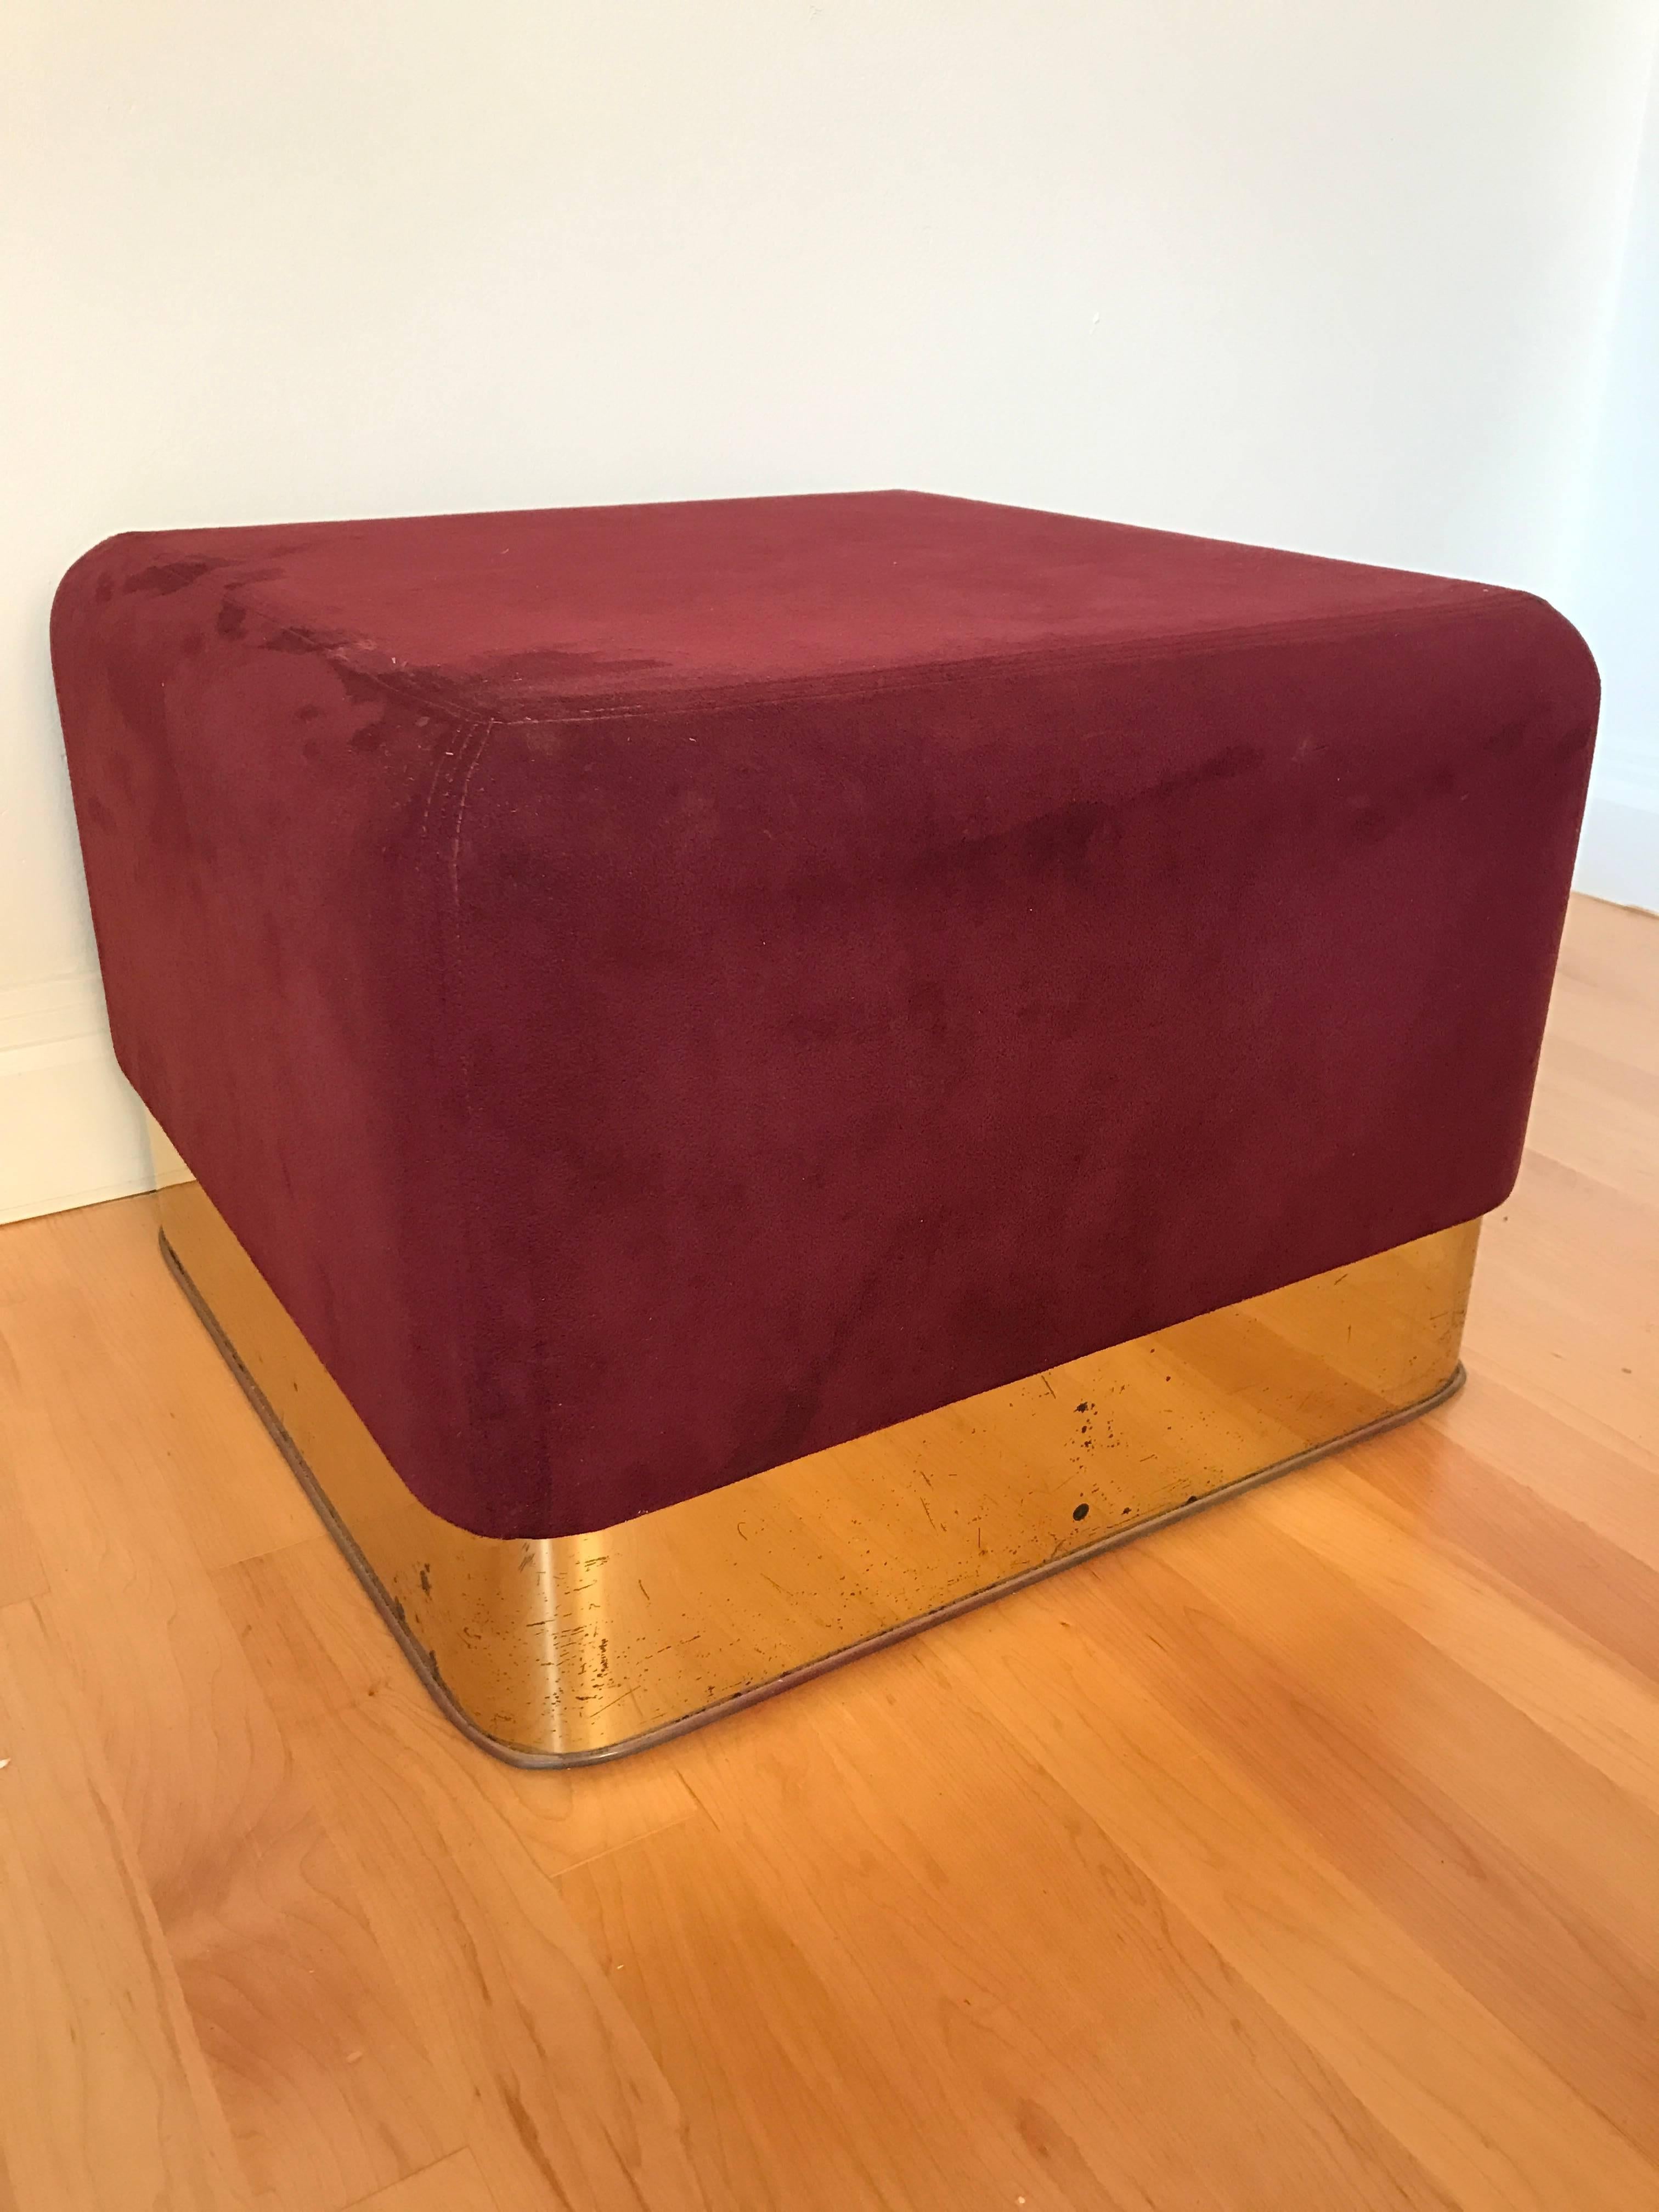 Pair of burgundy suede stools with patinated brass base by Milo Baughman for Thayer Coggin.